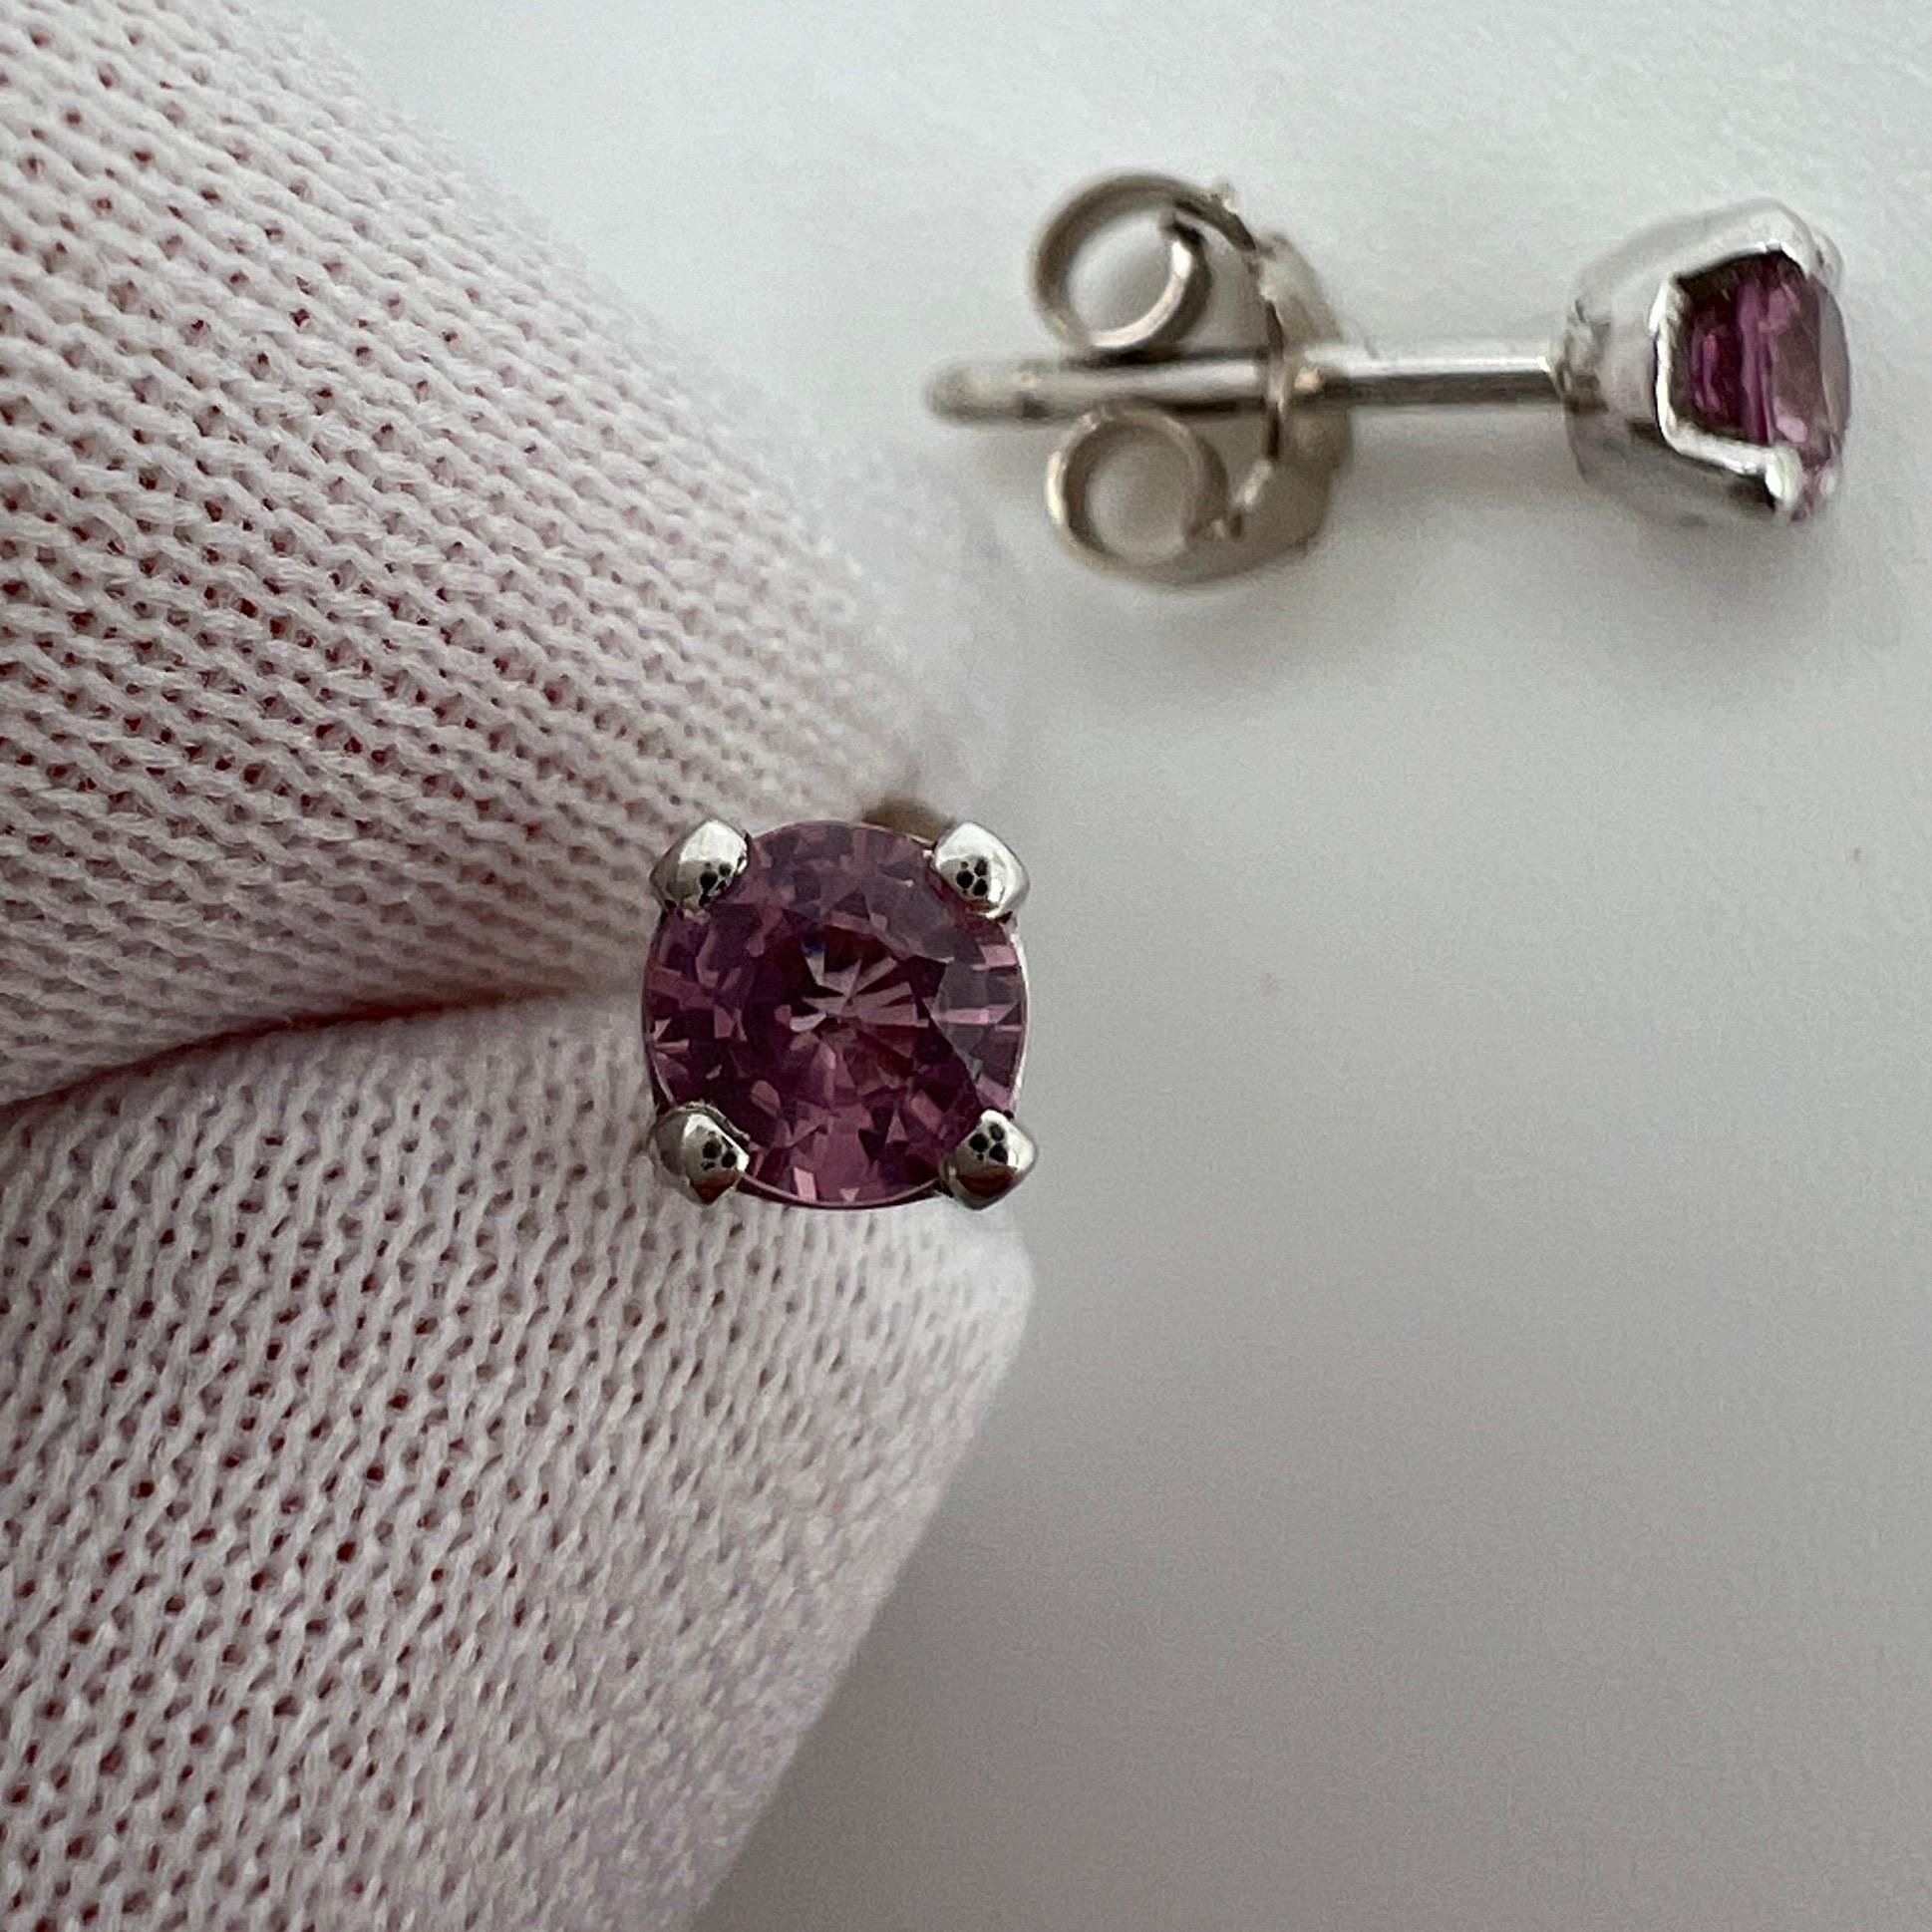 0.60ct Natural Vivid Pink Sapphires 18K White Gold Round Cut Earring Studs.

Stunning natural 4mm vivid pink sapphires in 18k white gold studs.
0.60 total carat, perfect matching pair. 

Both have a beautiful vibrant colour and very good clarity.